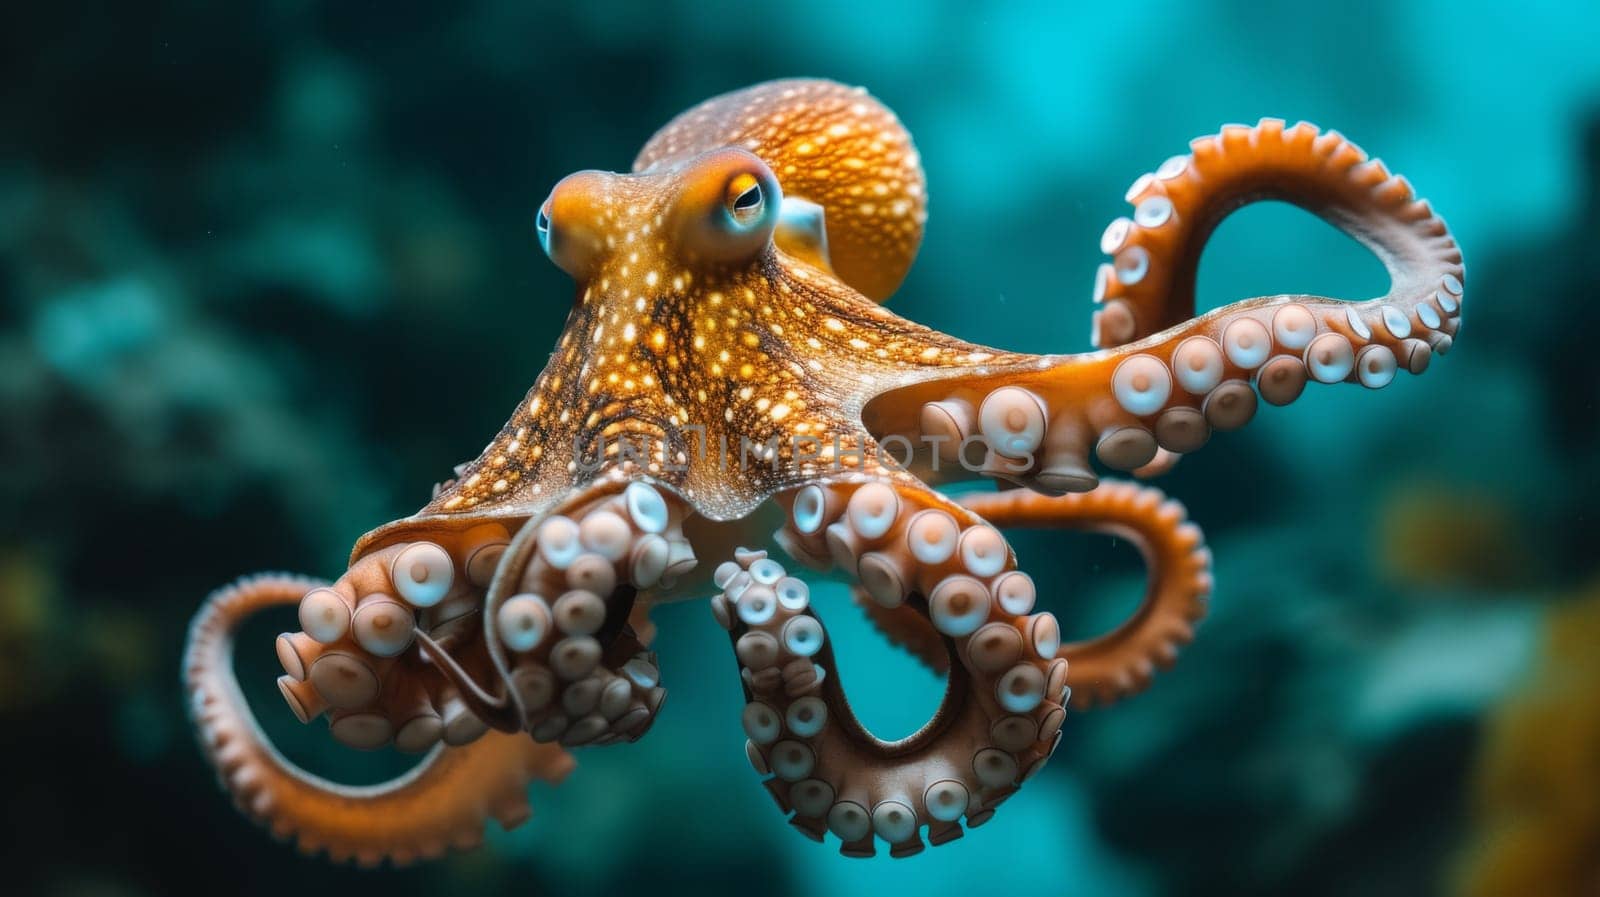 An octopus with large eyes and tentacles swimming in the ocean